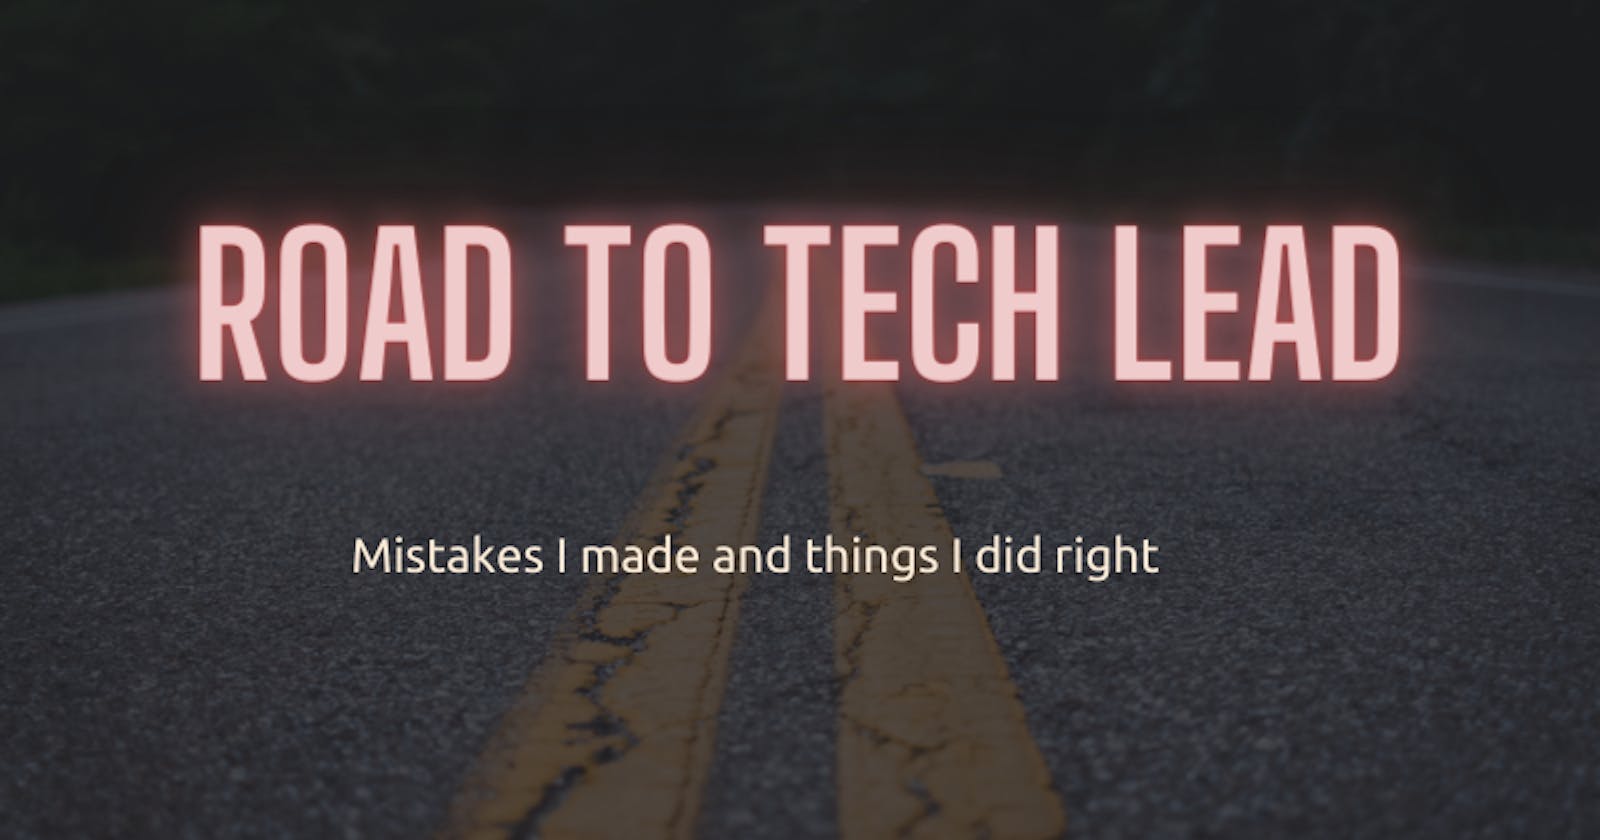 Road to Tech Lead